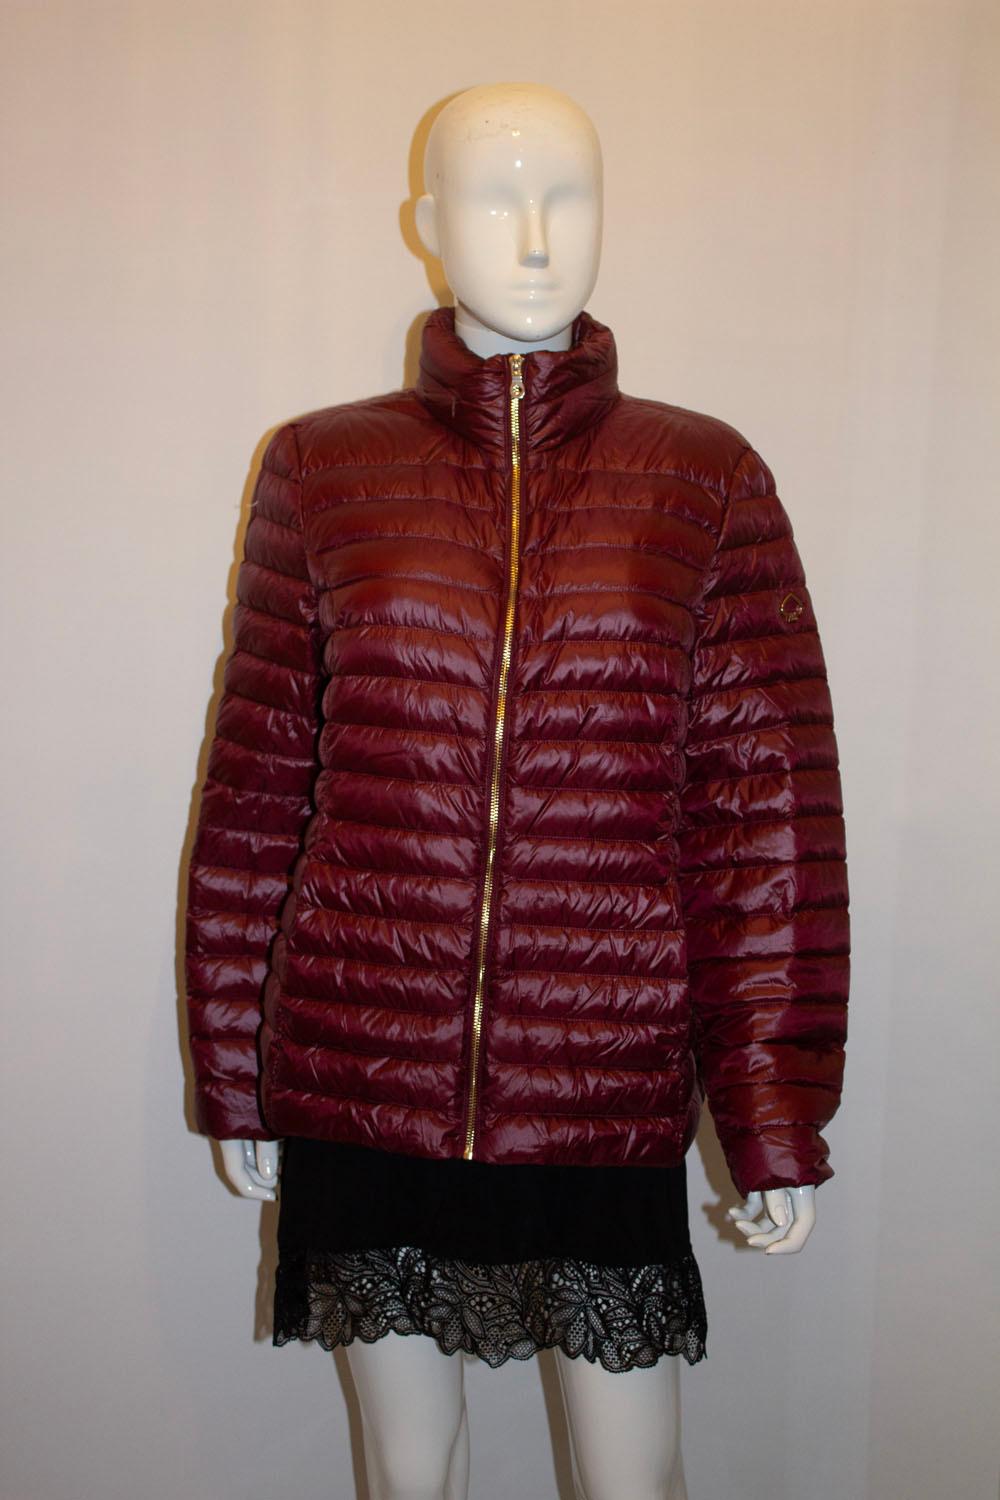 Kate Spade Burgundy Puffa Jacket with Hood in Collar For Sale 3